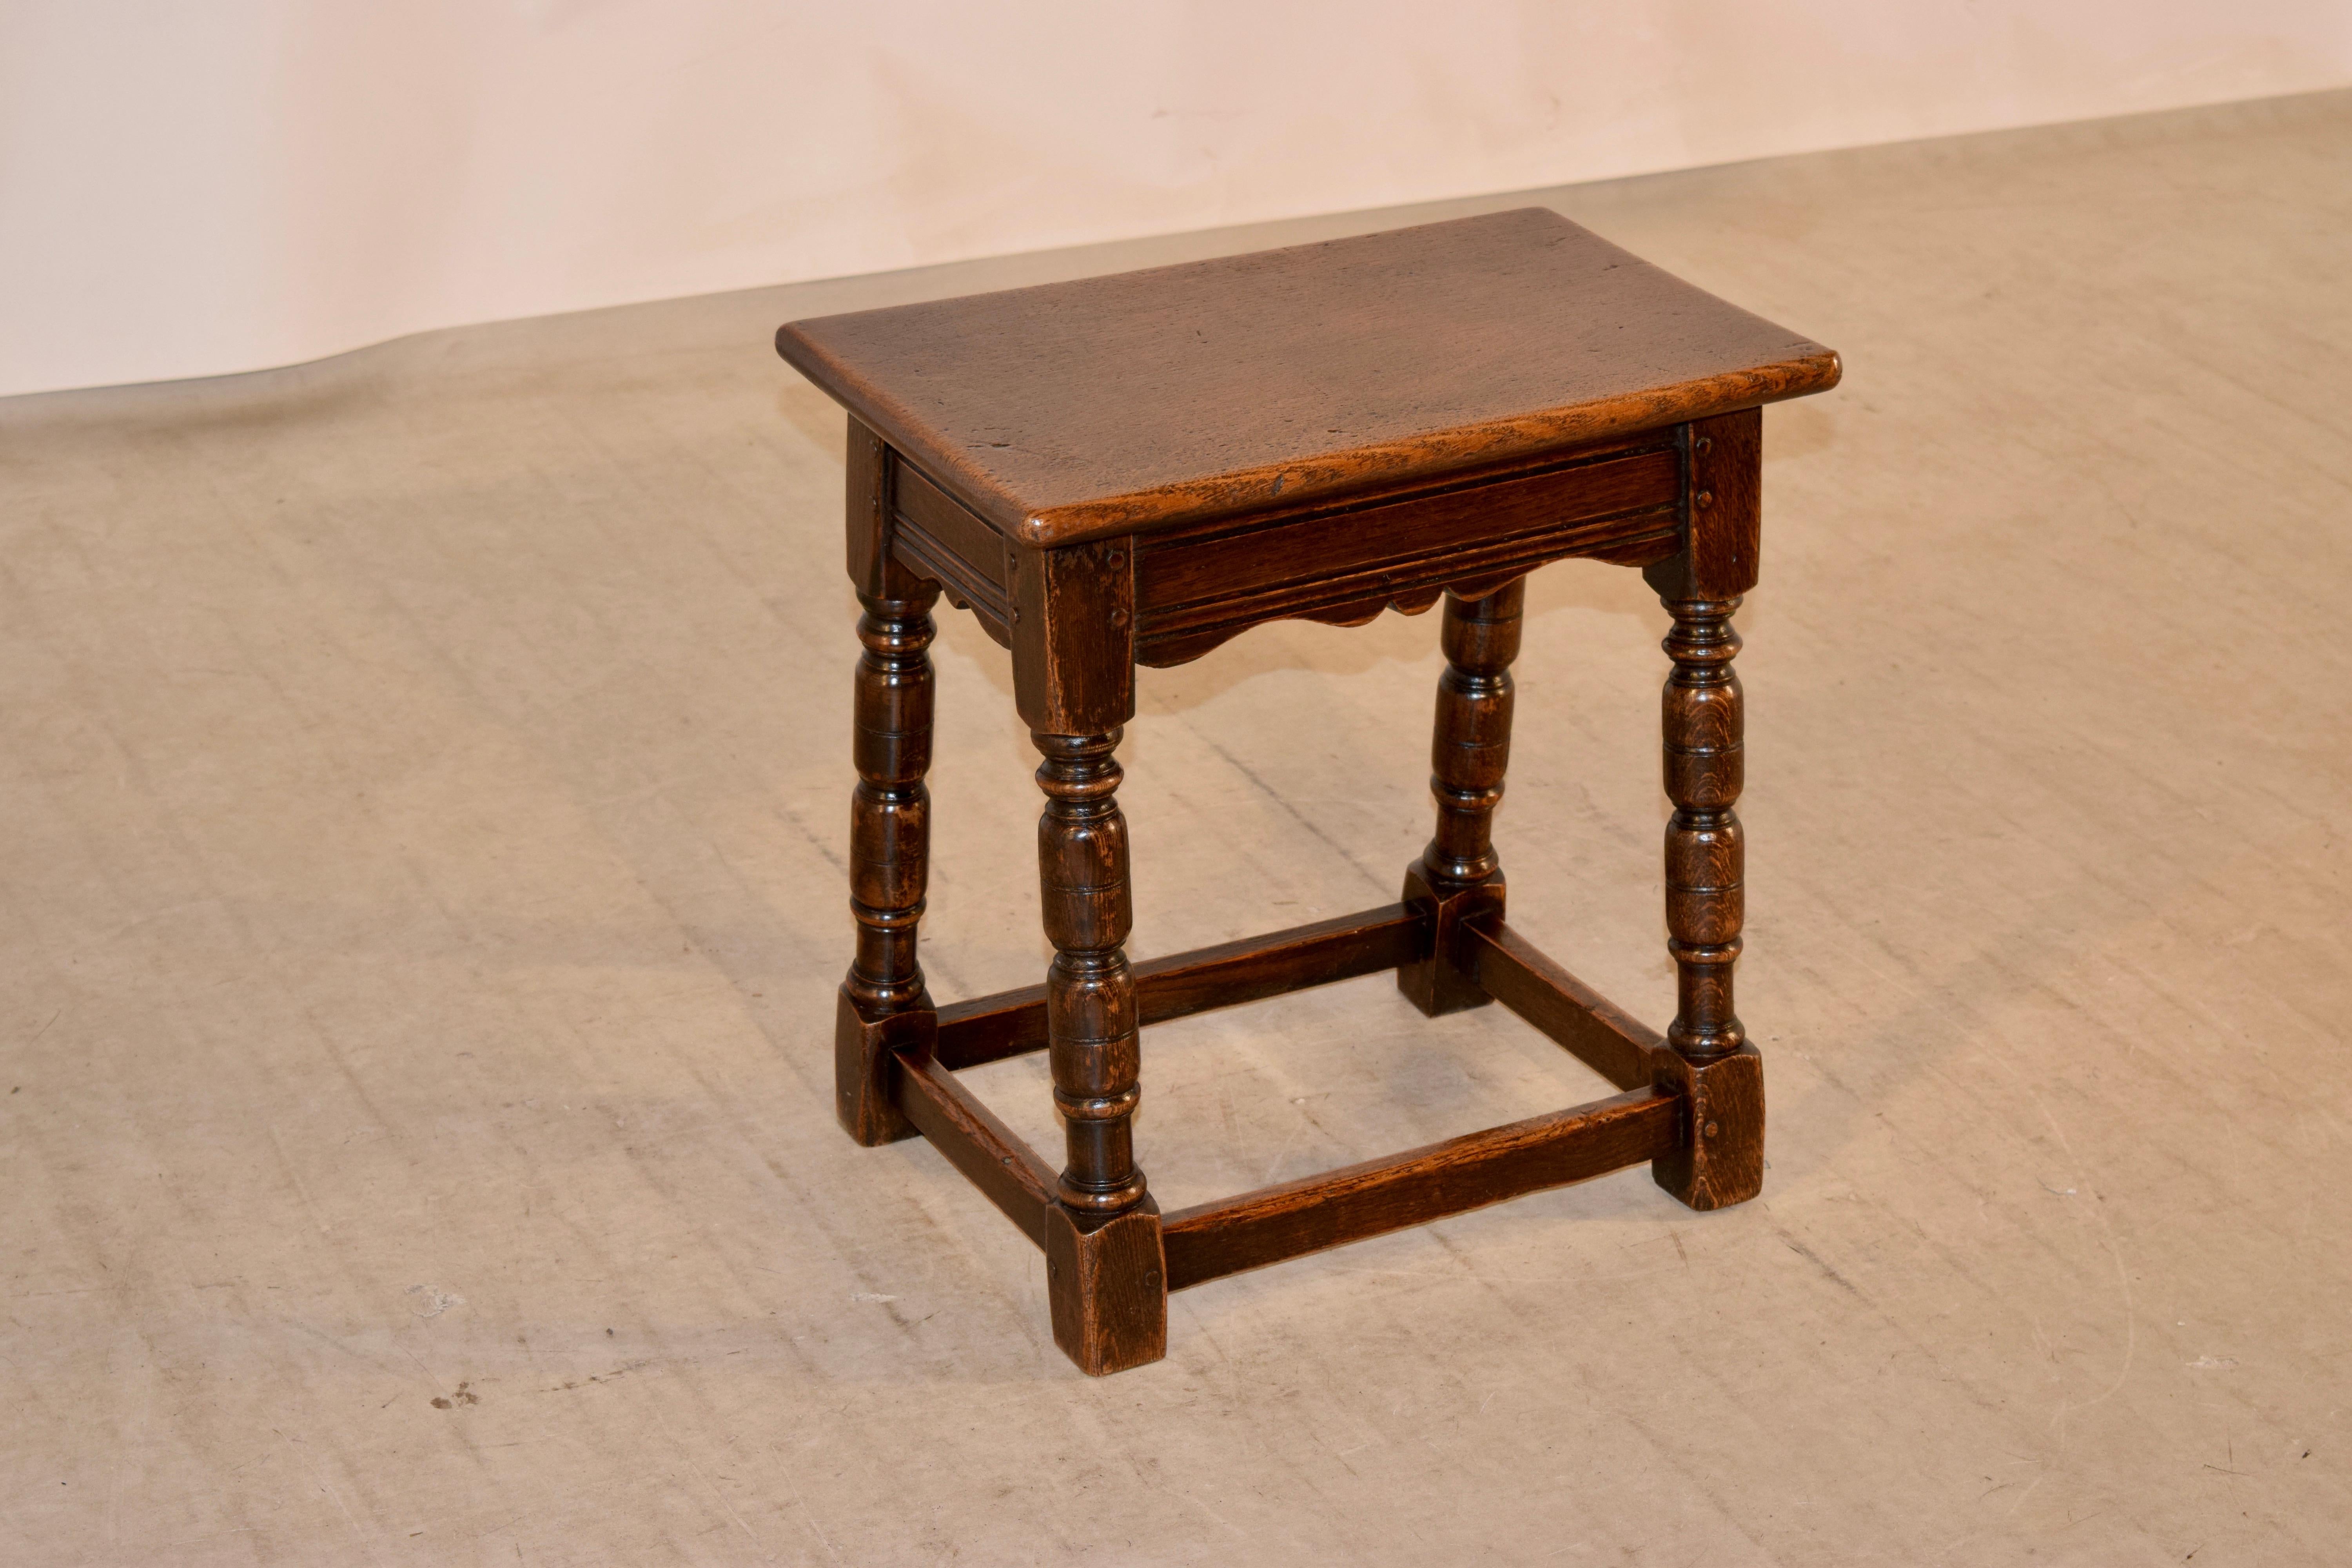 19th century English oak joint stool with a simple top following down to hand scalloped aprons with routed decoration and supports on splayed hand turned legs, joined by simple stretchers.